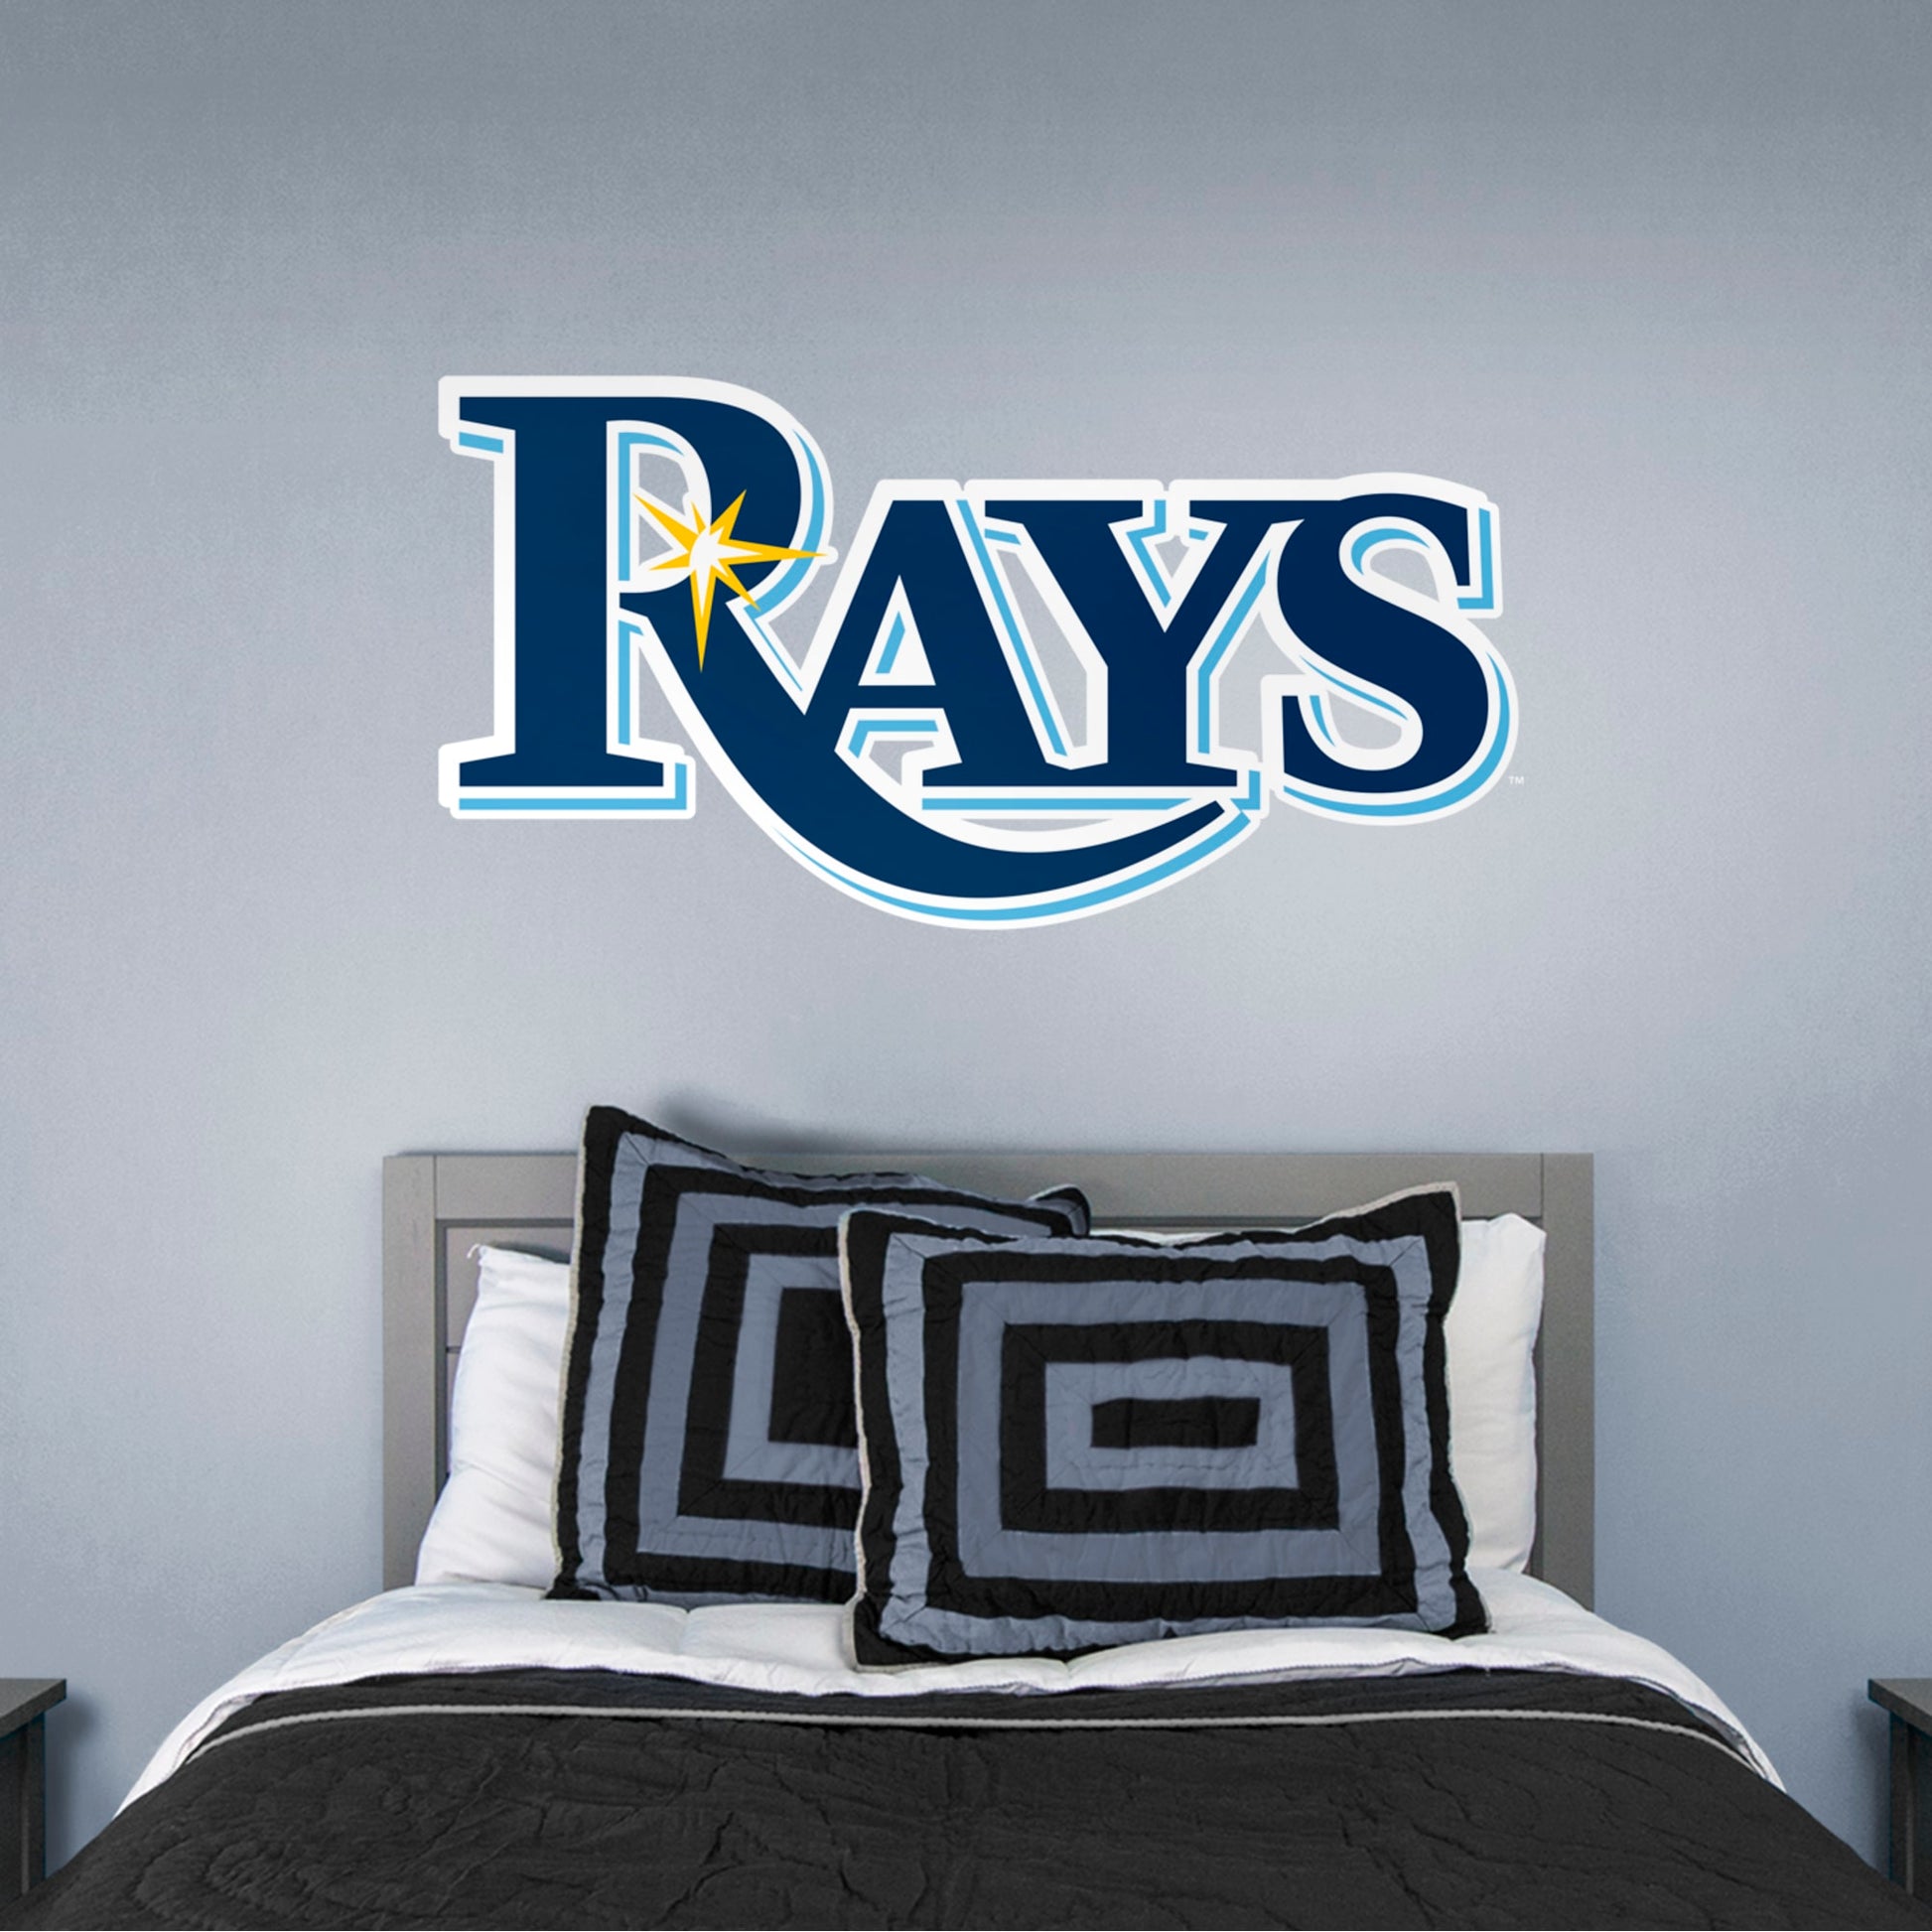 MLB Randy Arozarena 2020 - Officially Licensed MLB Removable Wall Decal